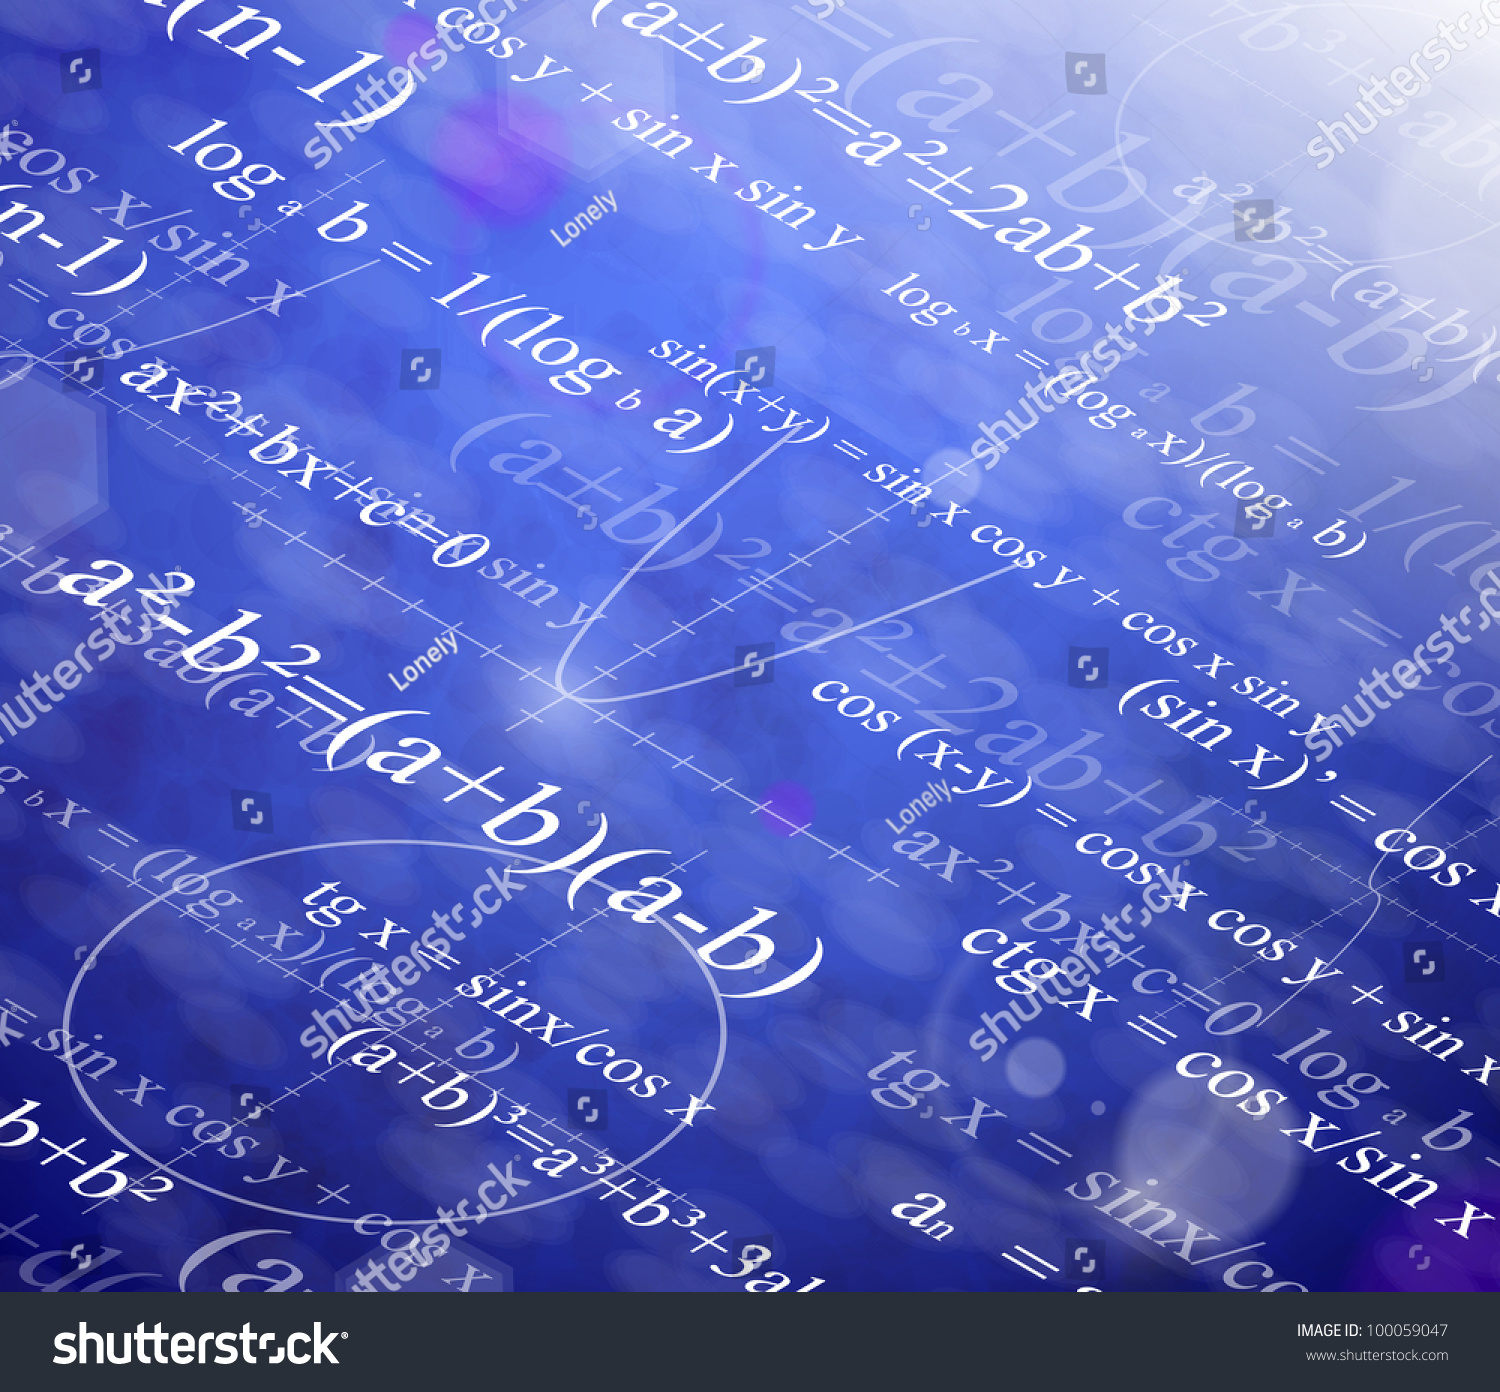 http://image.shutterstock.com/z/stock-vector-background-with-mathematical-formulas-eps-100059047.jpg